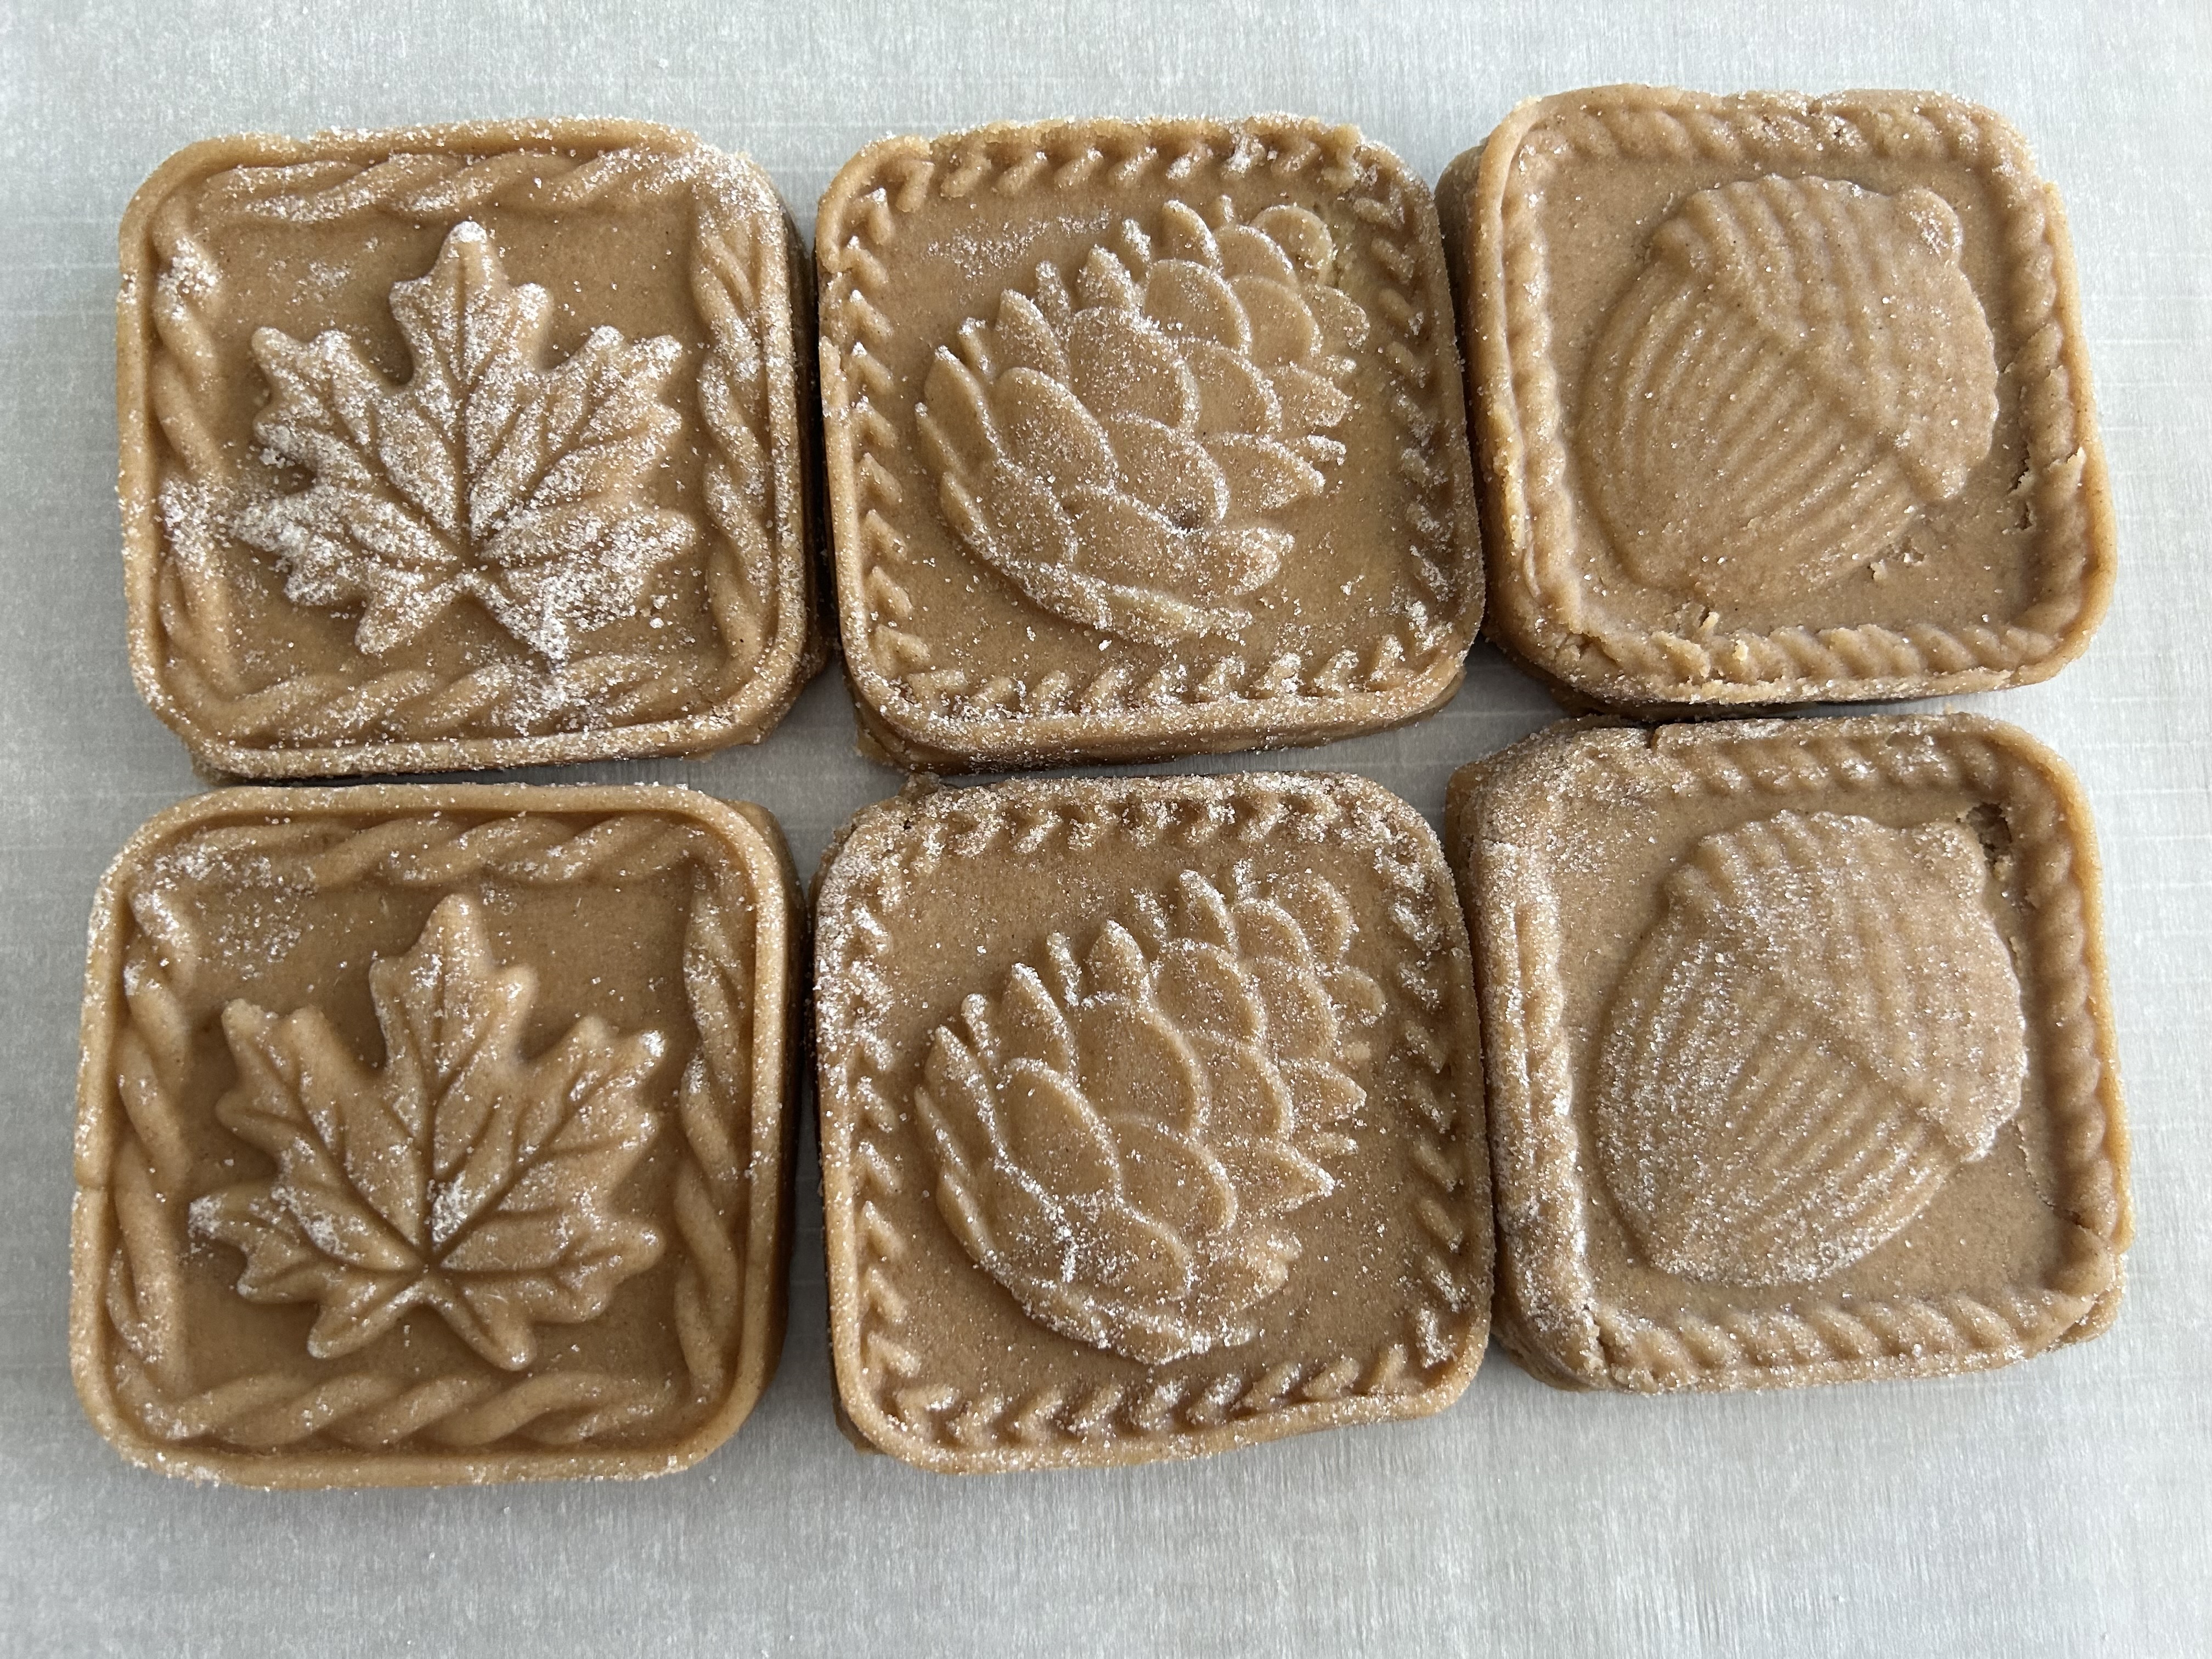 Nordic Ware Cookie Stamp Review